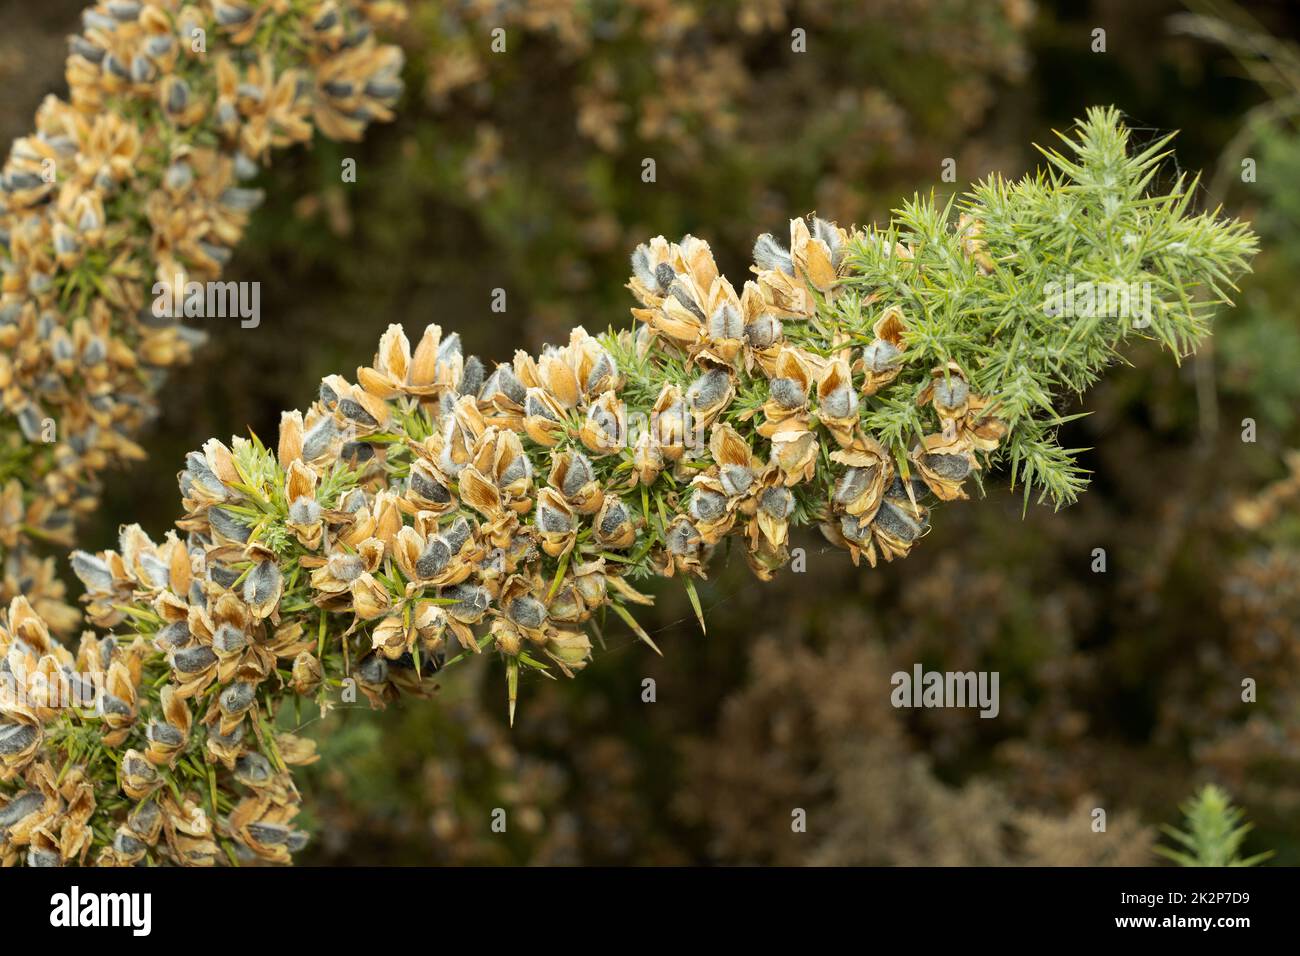 On warm dry summer days, the sound of Gorse seed pods popping open sounds just like the breakfast cereal that goes snap, crackle and pop. Stock Photo